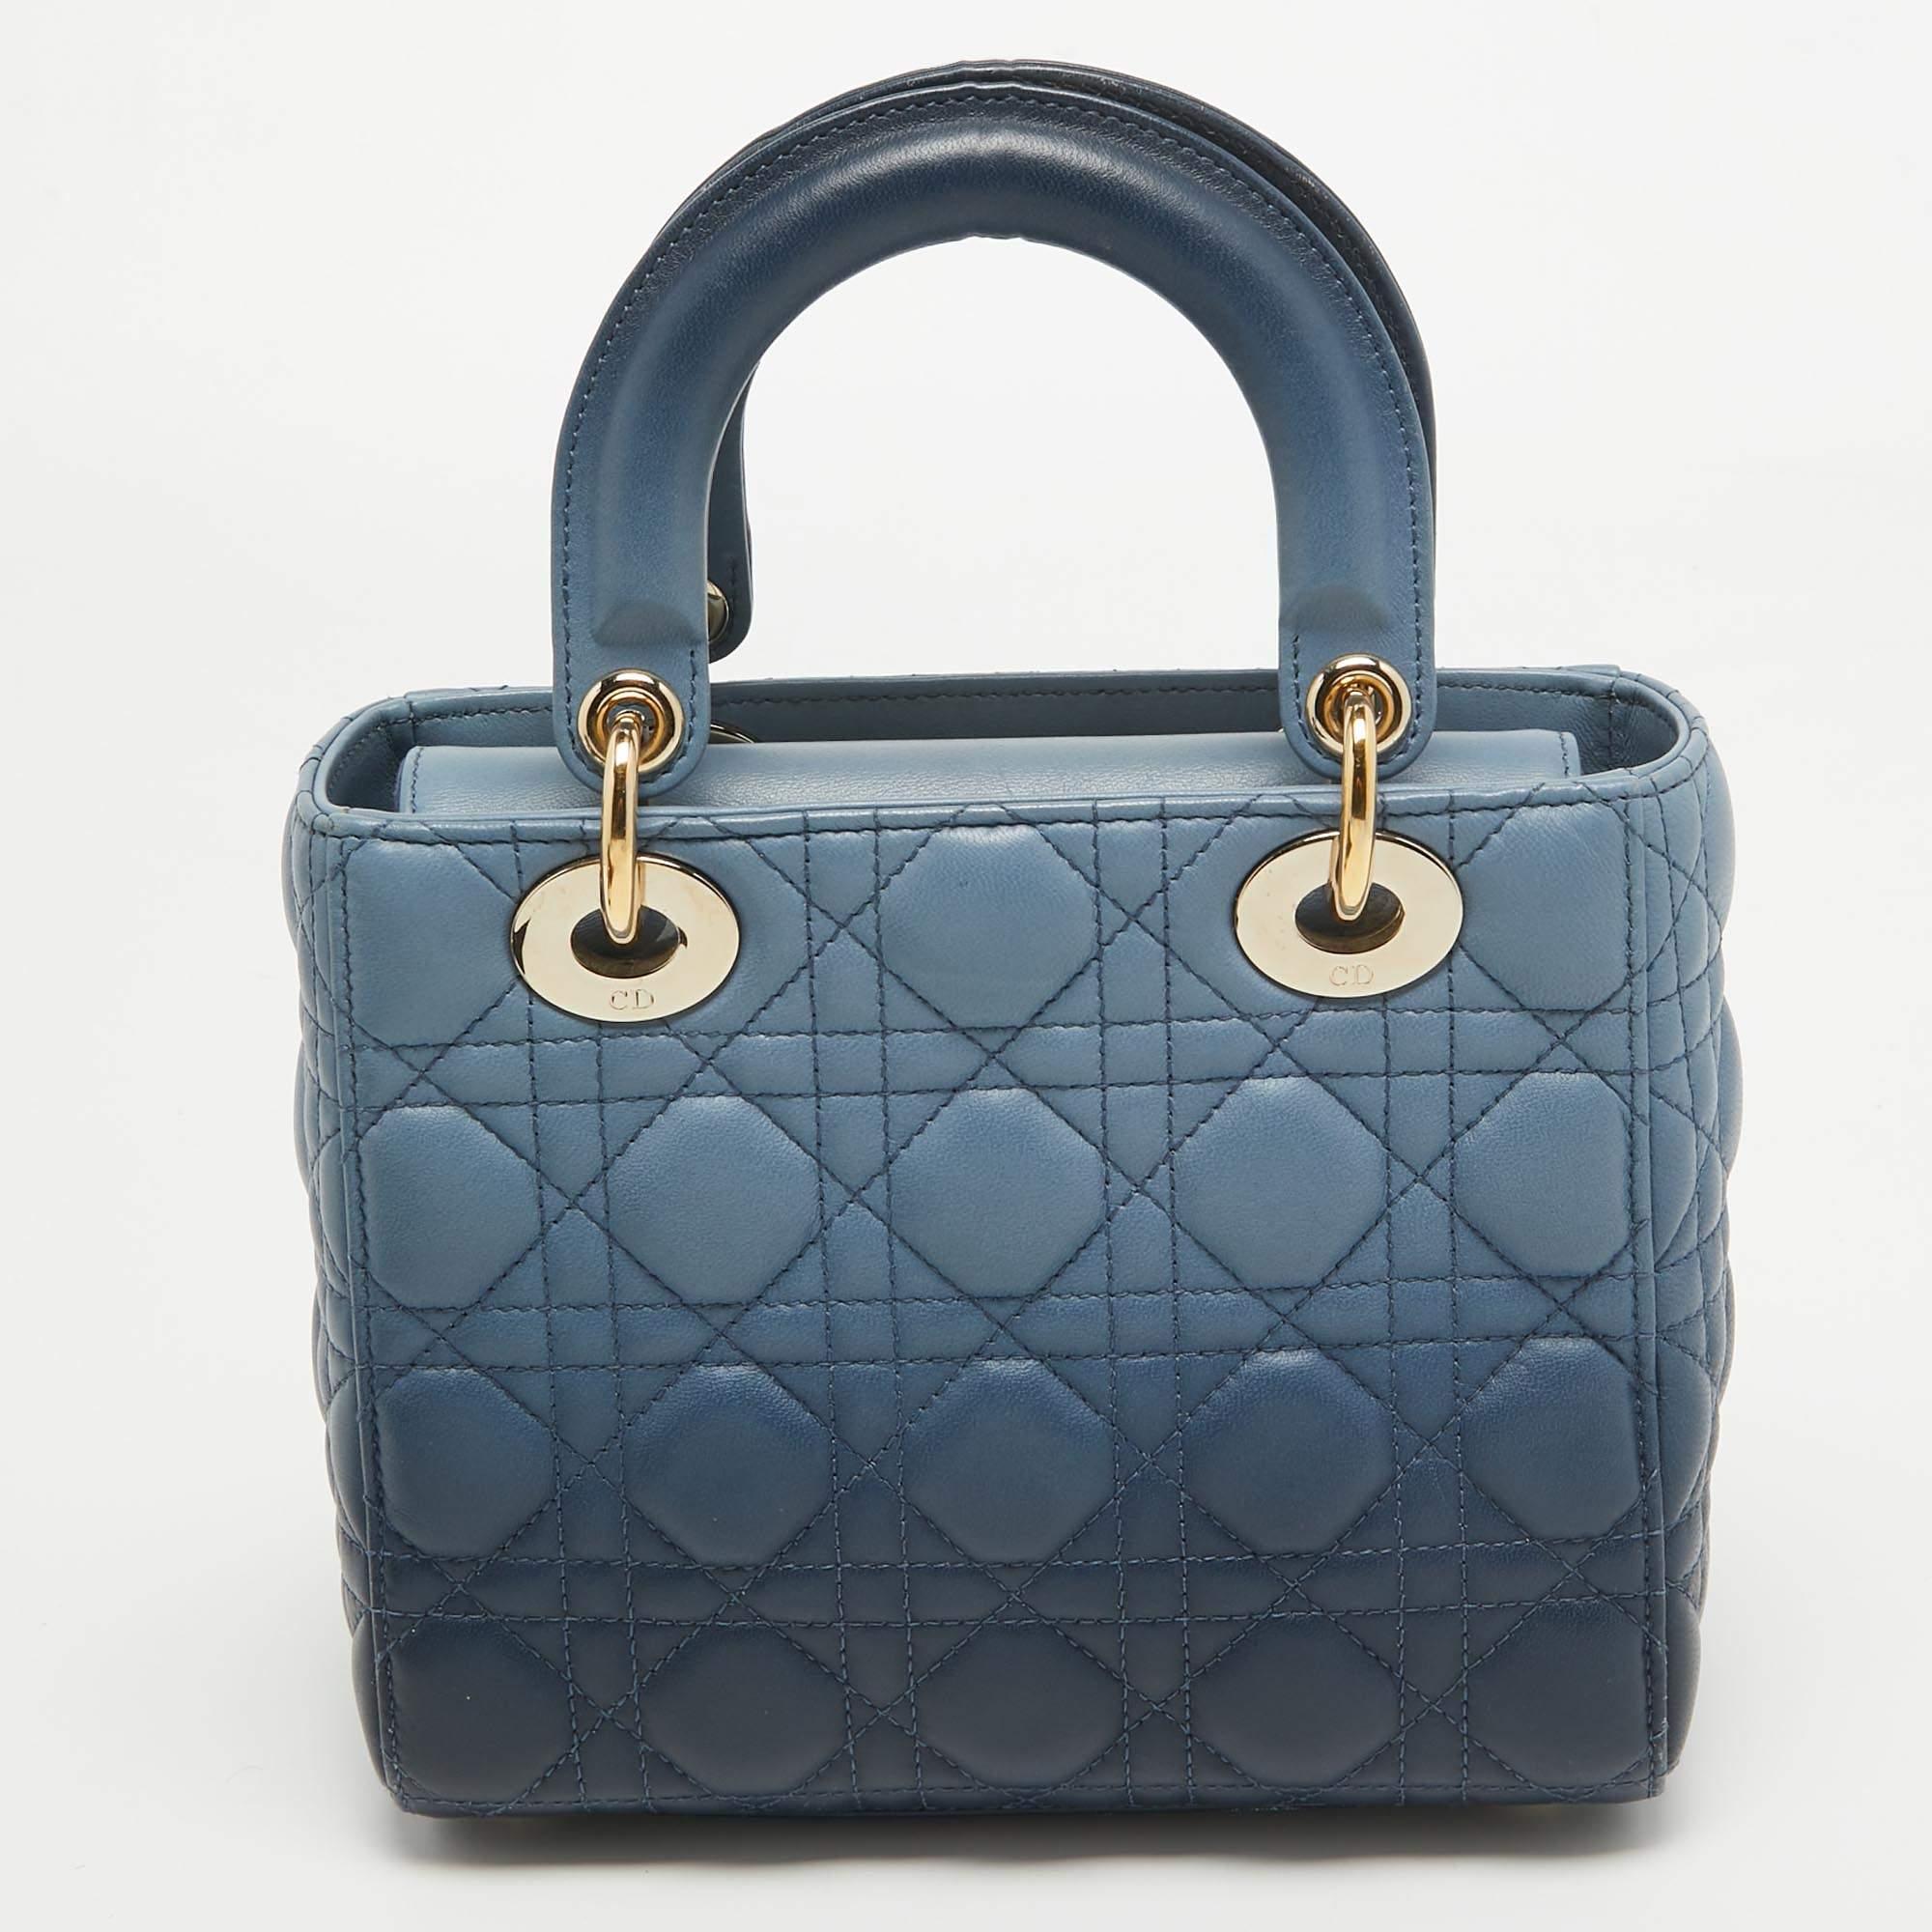 A timeless status and great design mark the Lady Dior bag. It is an iconic bag that people continue to invest in to this day. We have here this classic beauty crafted from ombre blue Cannage leather. The bag has a lined interior for your essentials.